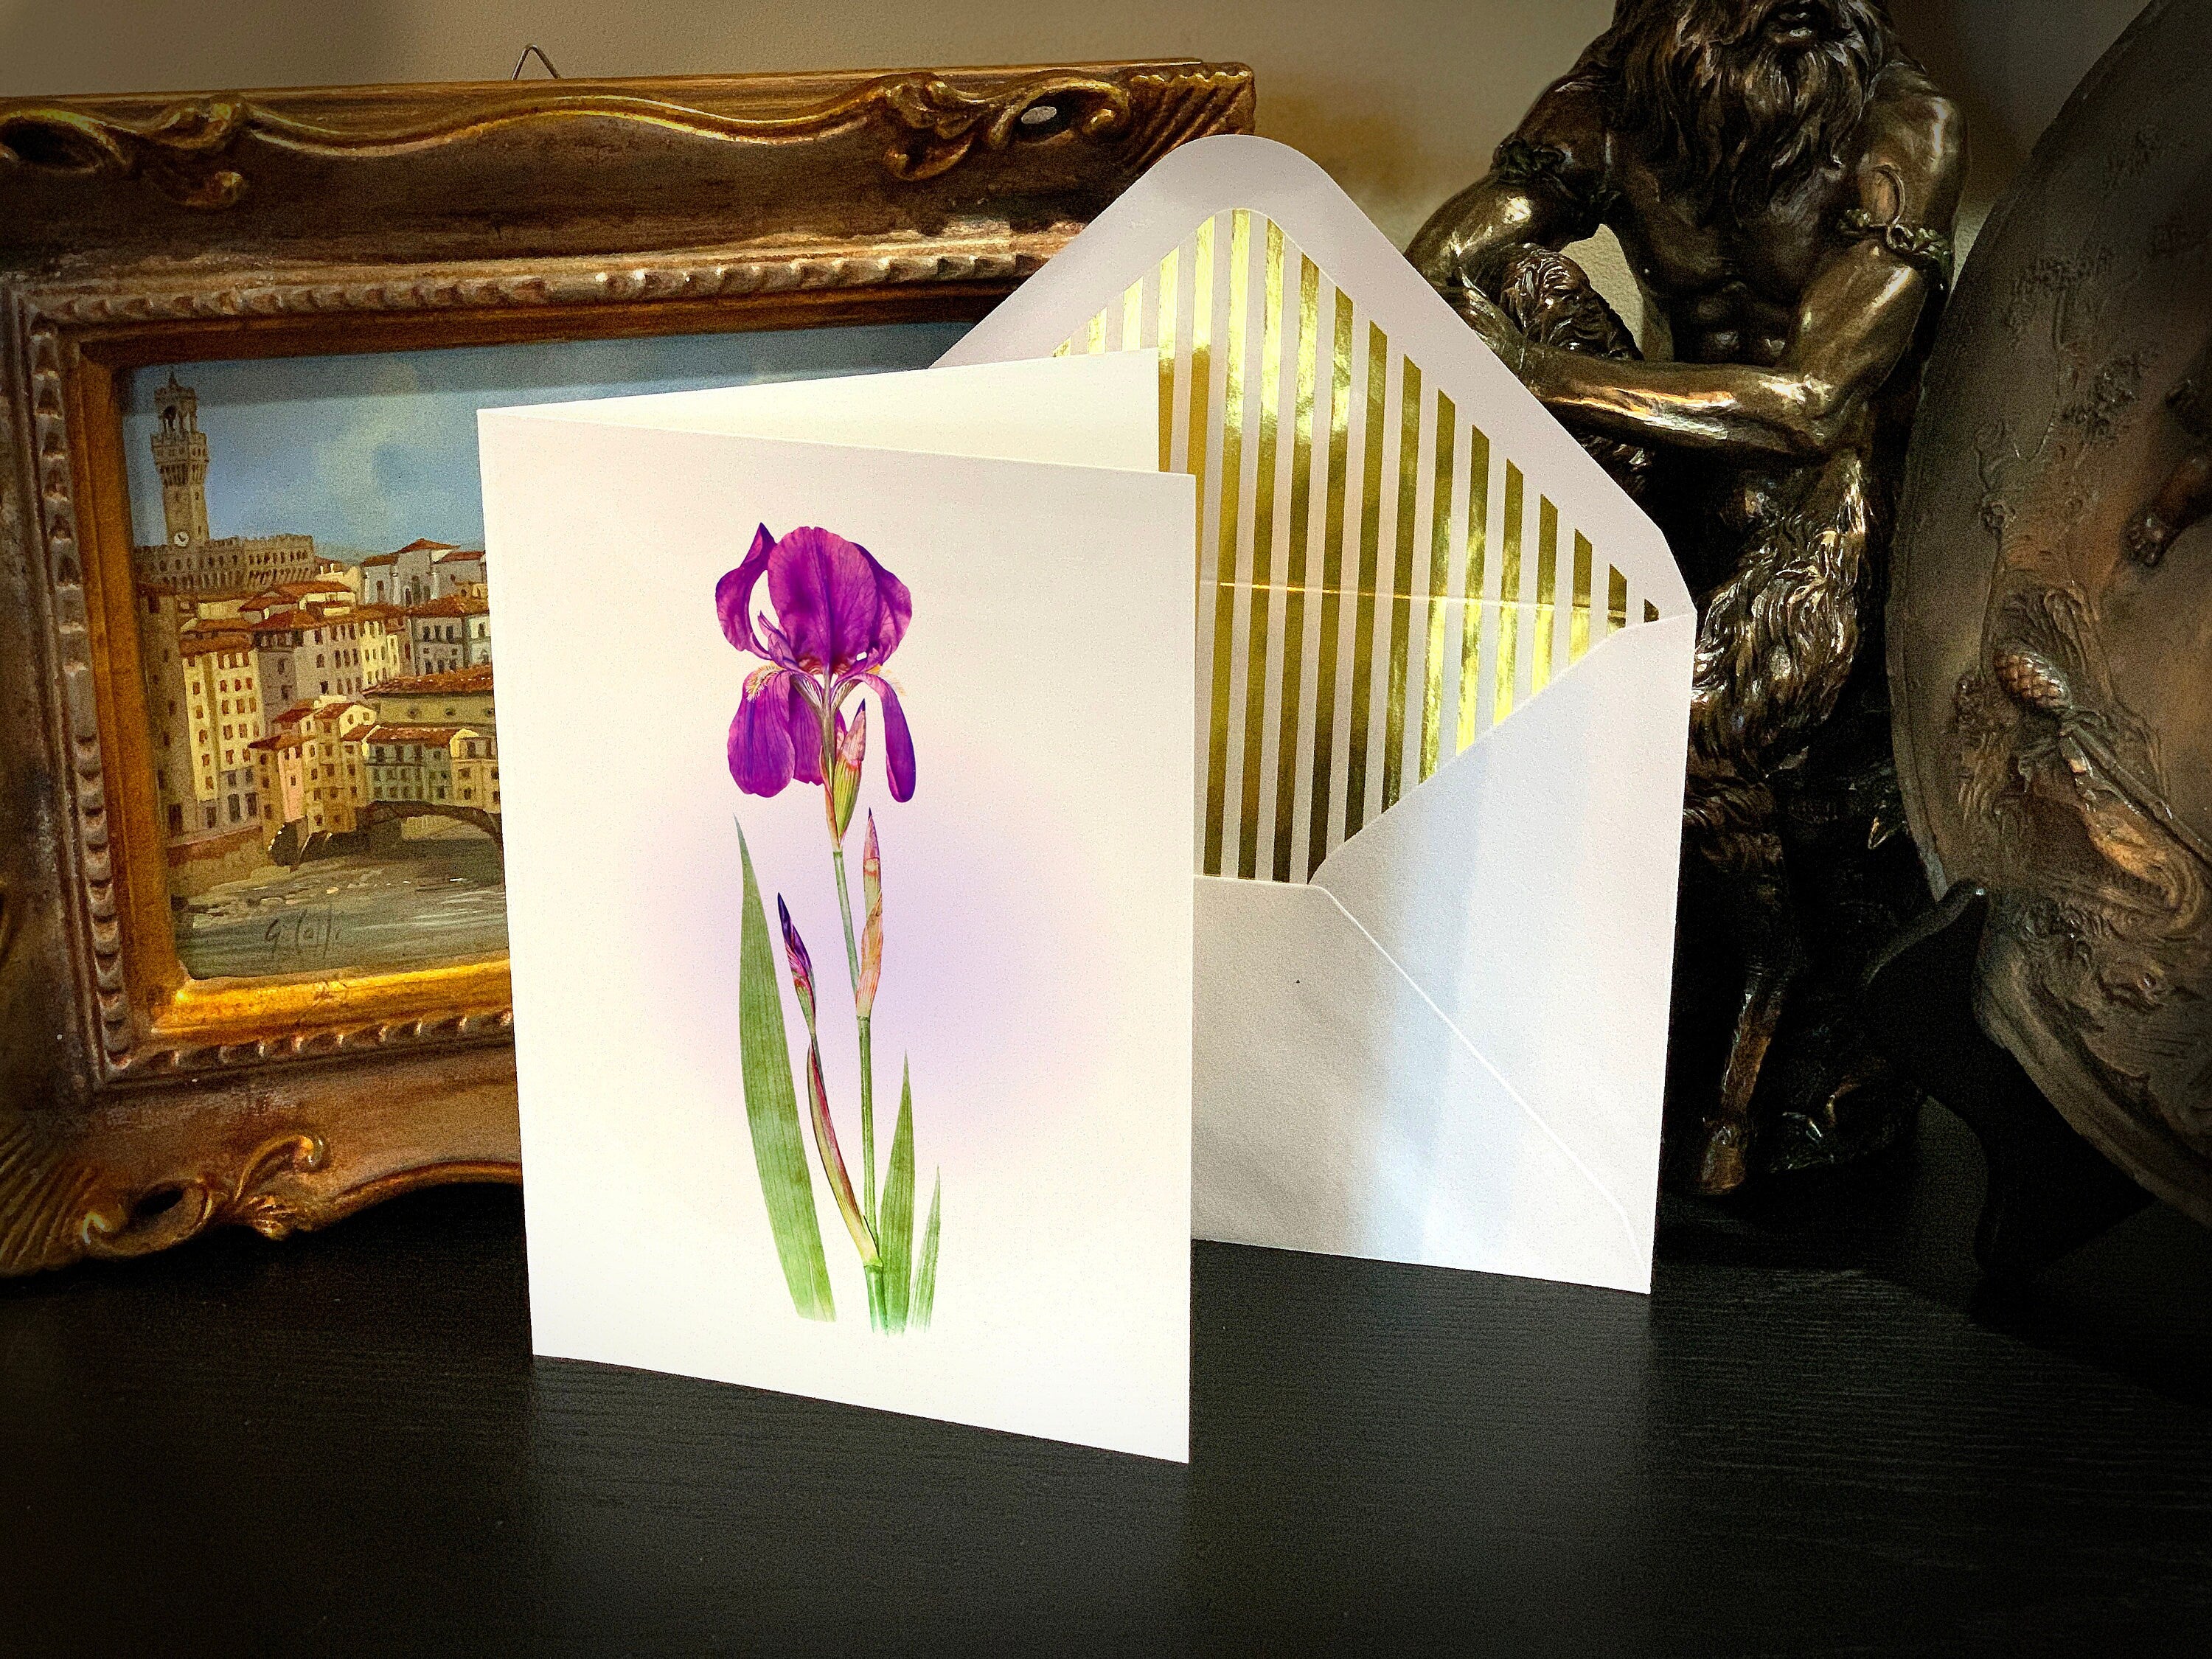 Irises by William Rickatson Dykes, Everyday Floral Greeting Cards with Elegant Striped Gold Foil Envelopes, 5in x 7in, 5 Cards/5 Envelopes